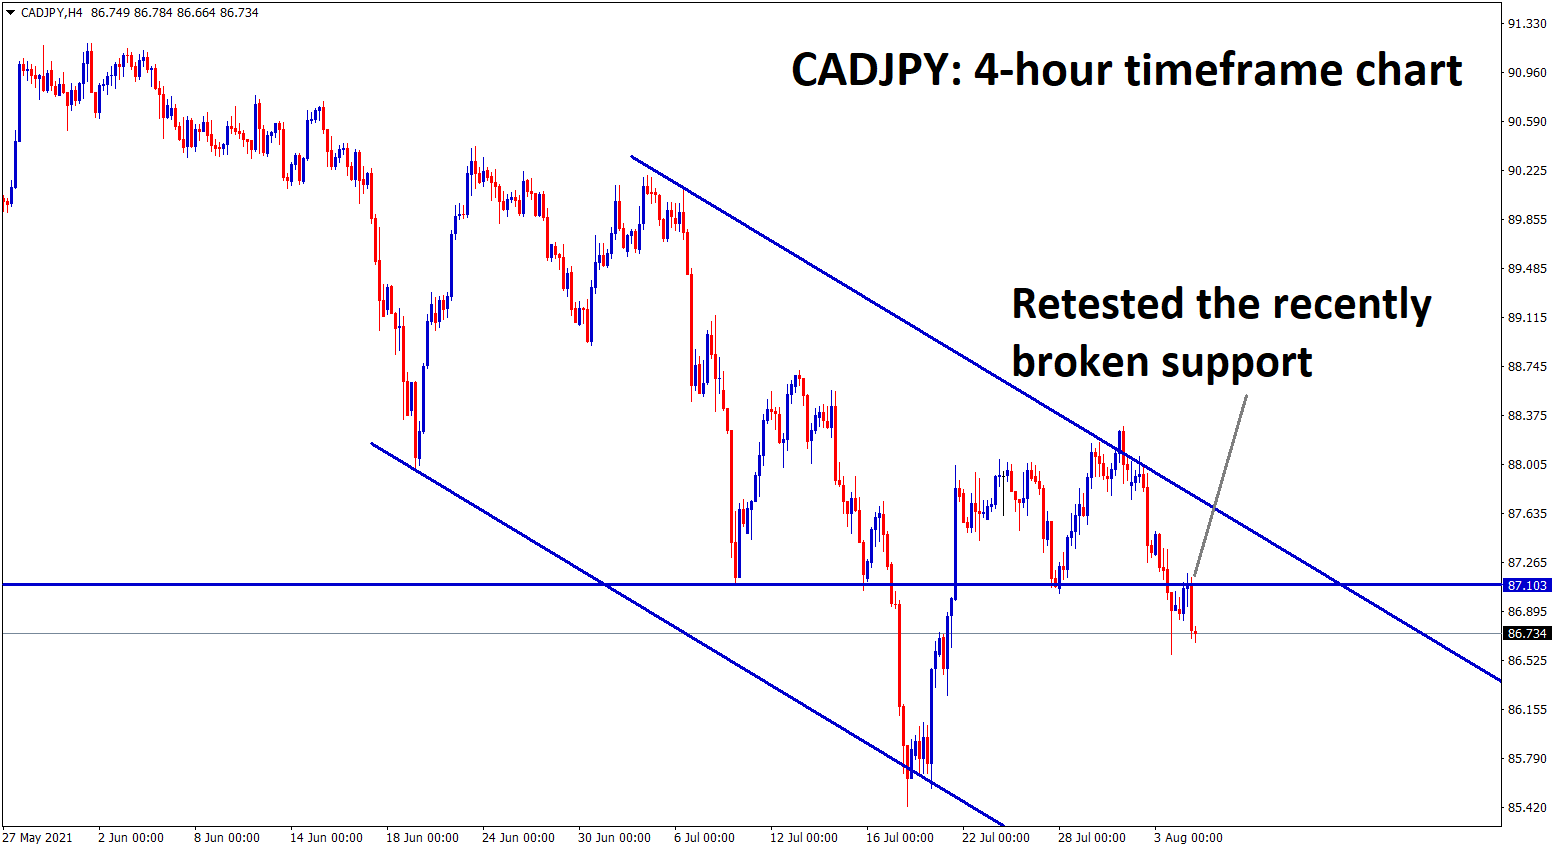 CADJPY has retested the recently broken support